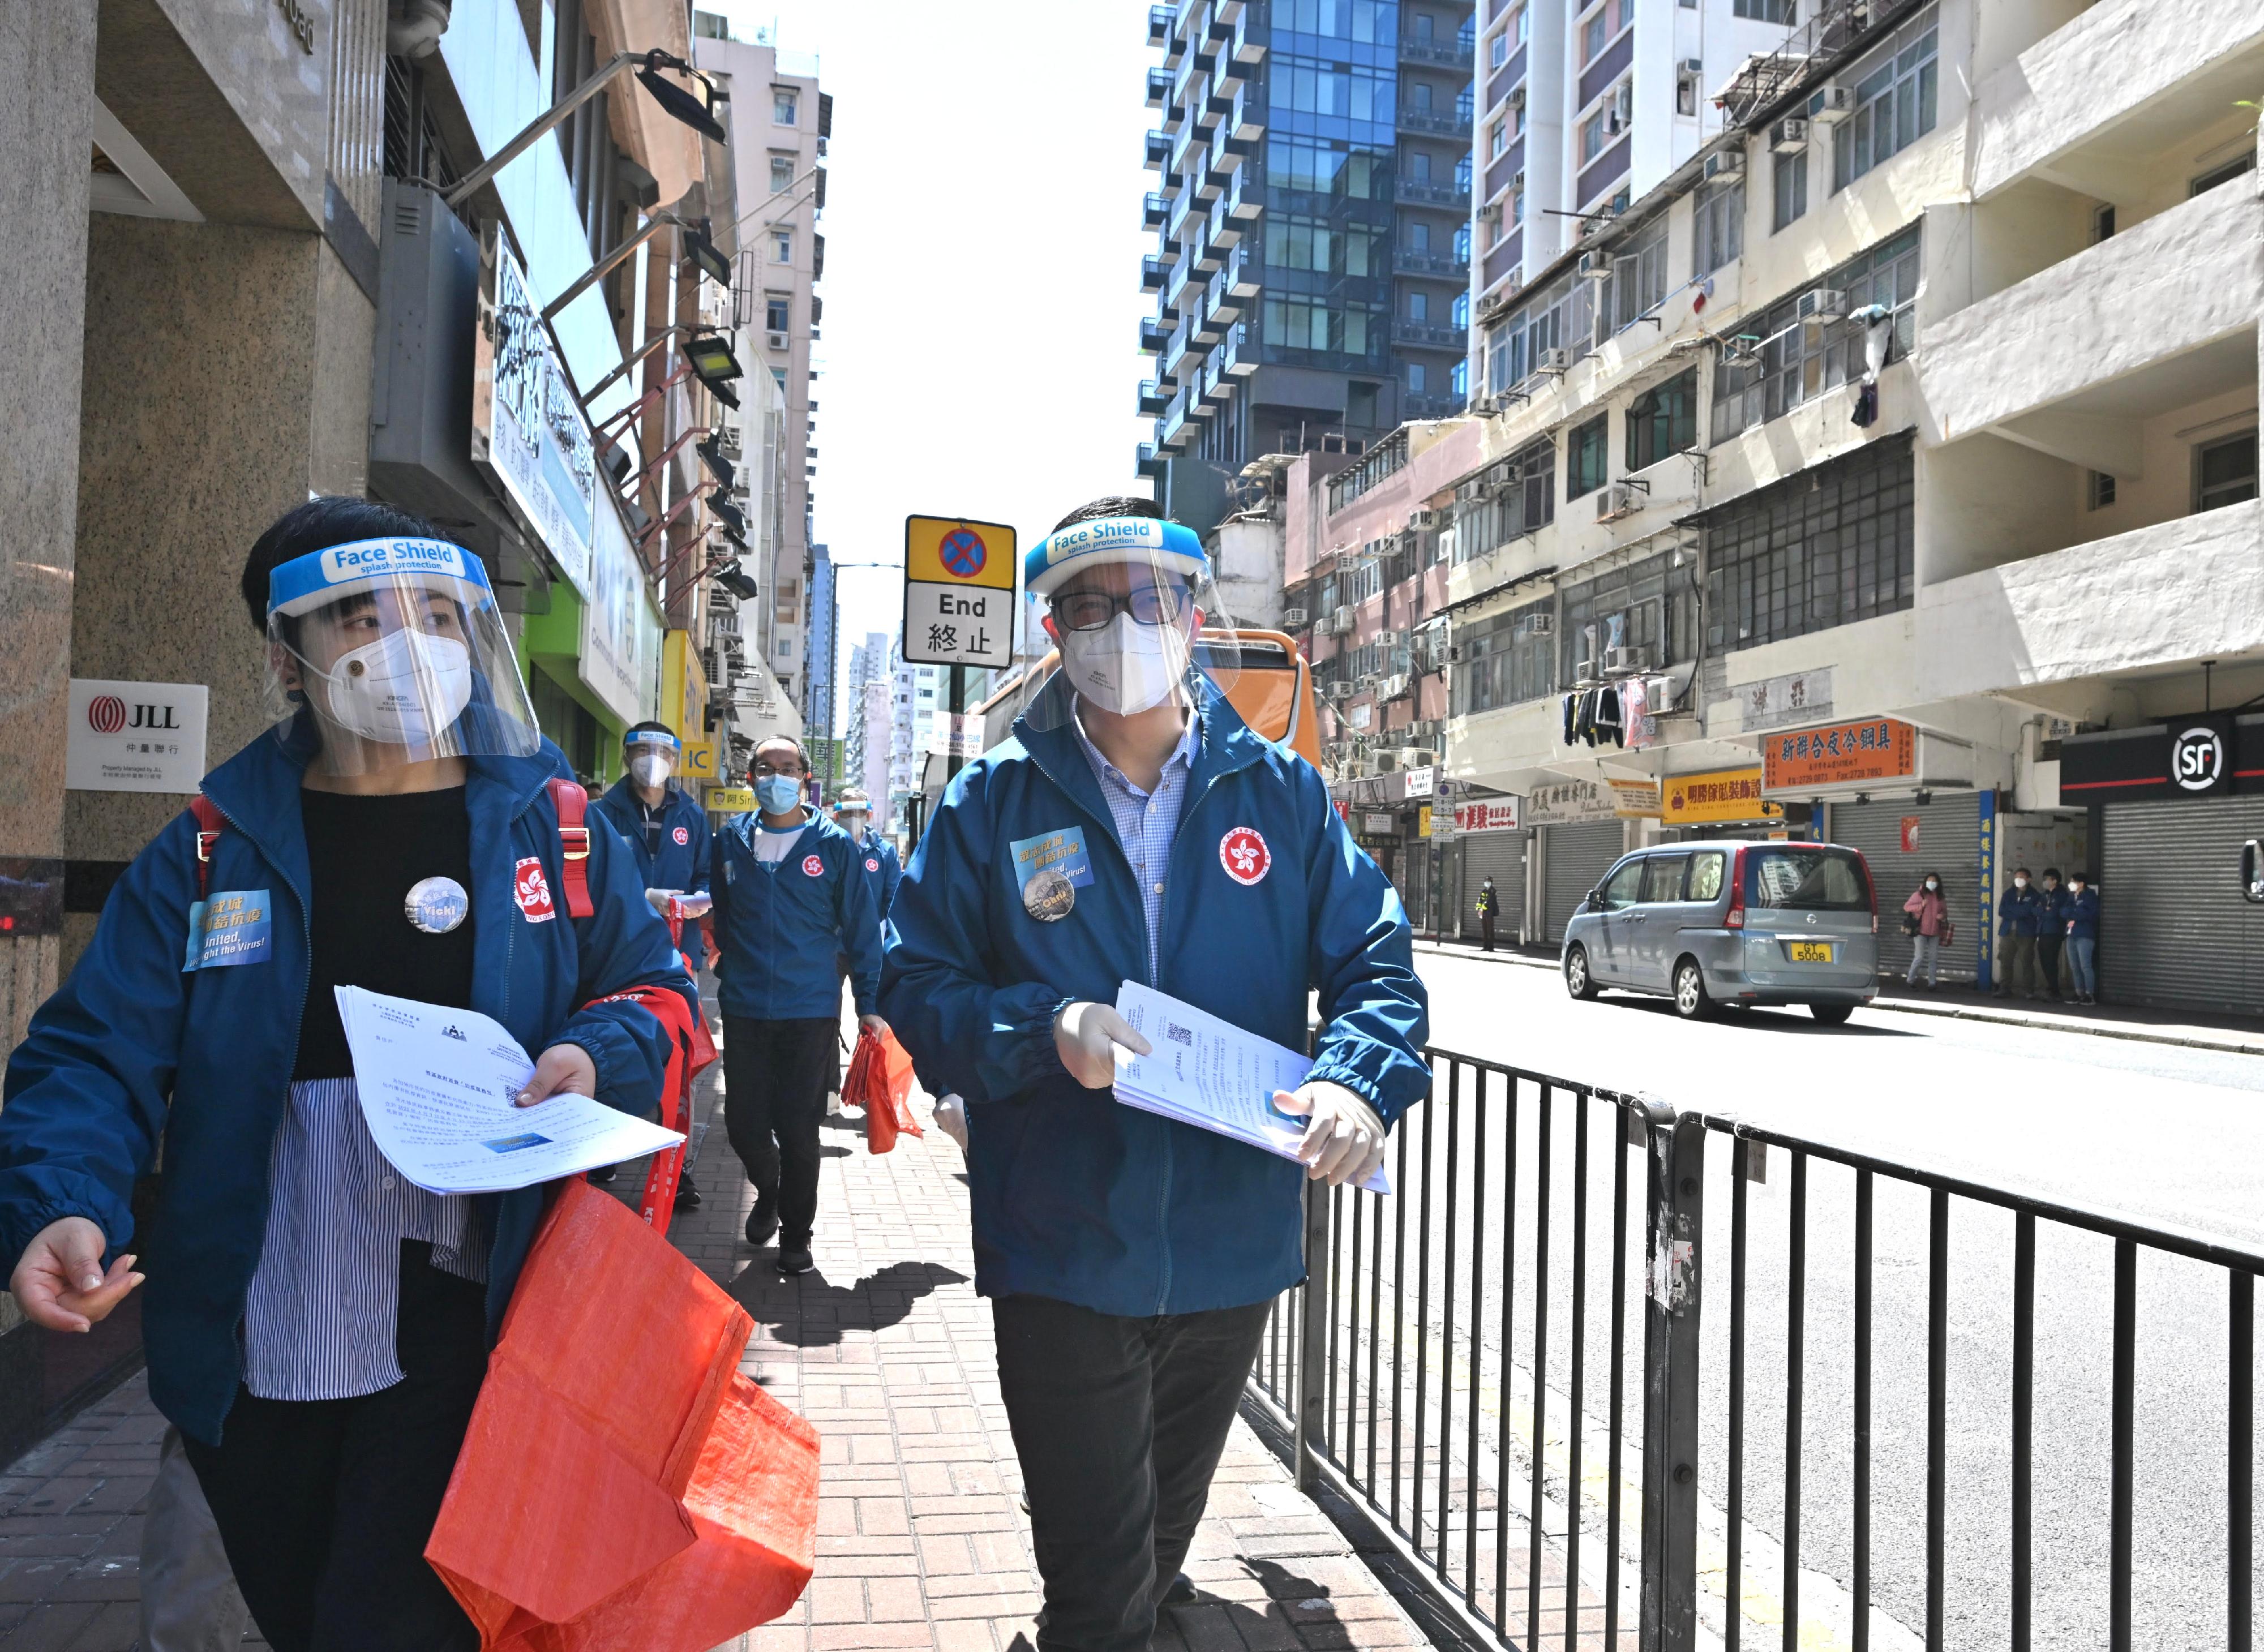 The Secretary for Security, Mr Tang Ping-keung, today (April 3) led colleagues of the Security Bureau, heads of the disciplined services and auxiliary services departments and their colleagues, representatives of the Independent Police Complaints Council as well as leaders and representatives of youth uniformed groups of various disciplined services departments to distribute anti-epidemic service bags to residents in Sham Shui Po. Photo shows Mr Tang (first right) visiting Sham Shui Po to distribute anti-epidemic service bags to residents.